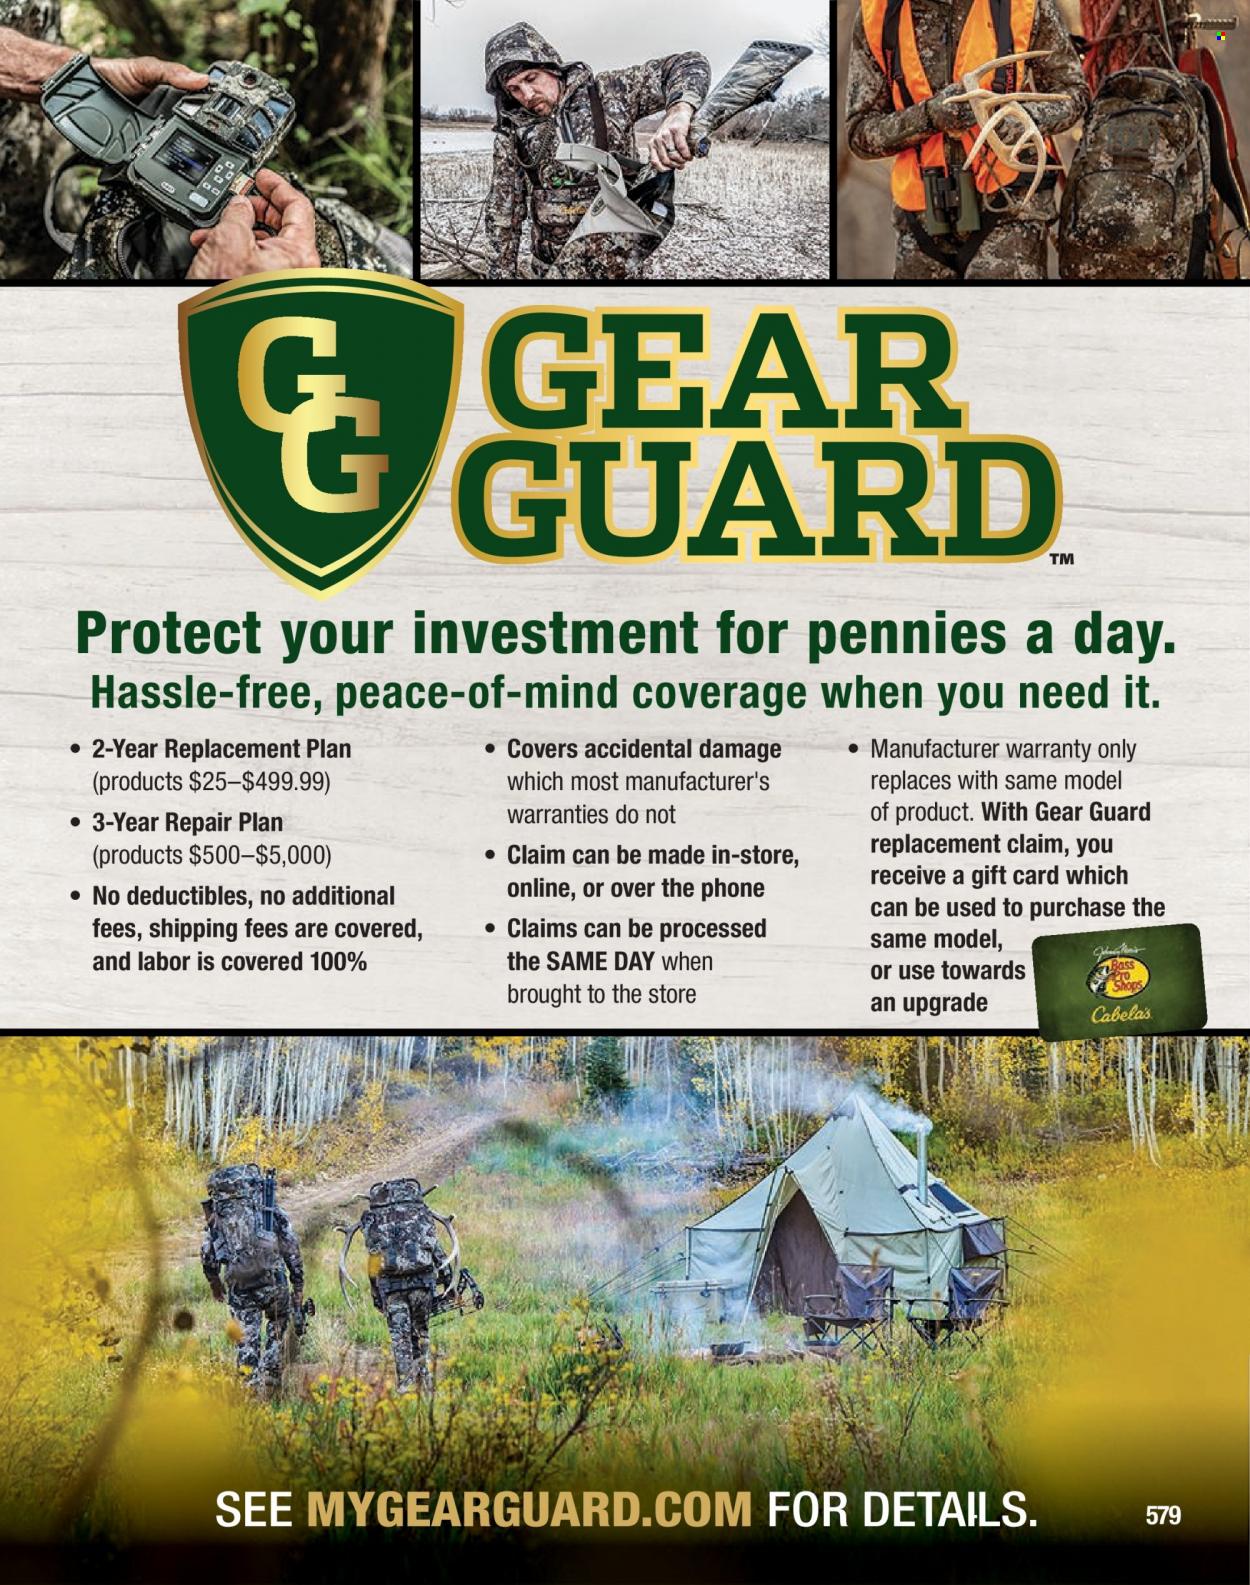 Bass Pro Shops flyer . Page 579.